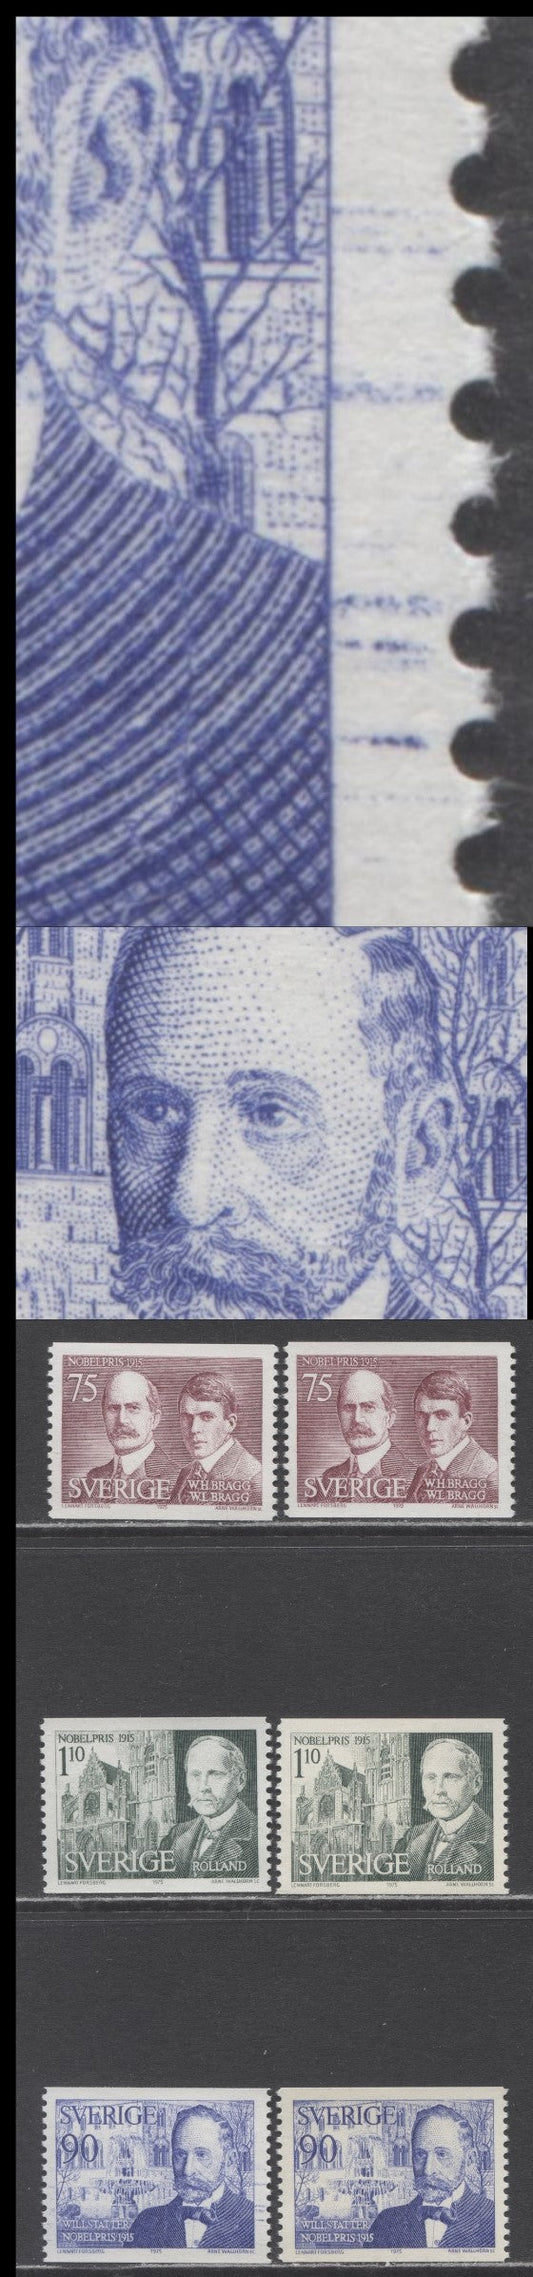 Lot 29 Sweden SC#1149-1151 1975 1915 Nobel Prize Winners Issue, With Strong And Weak Tagging, Plus Ink Drag Flaw, 6 VFNH Singles, Click on Listing to See ALL Pictures, Estimated Value $10